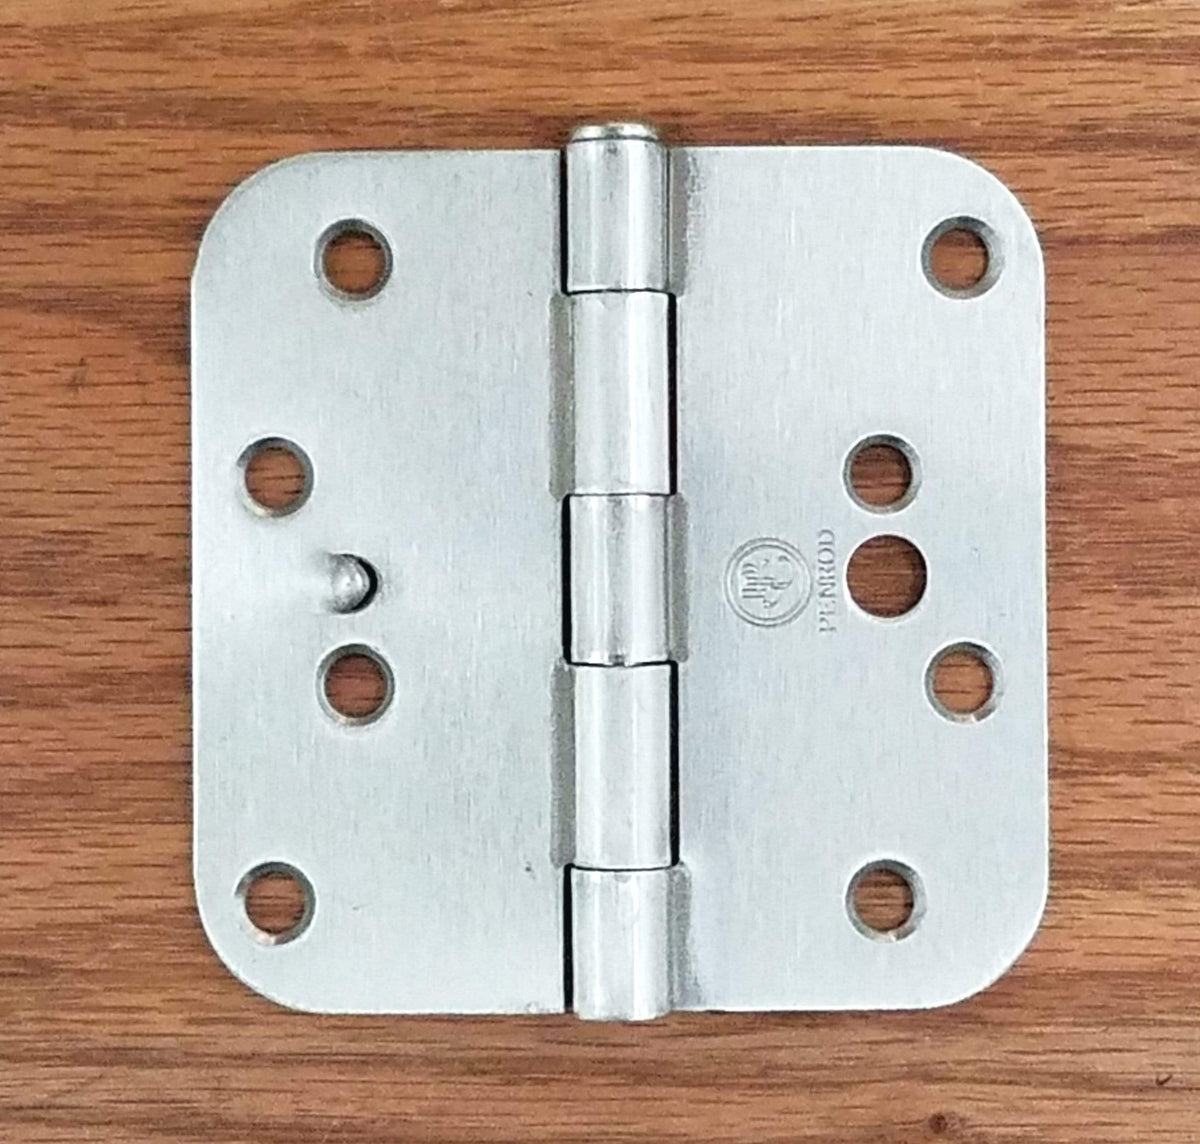 Clearance Satin Nickel Hinges With Security Tab - 4" Inch With 5/8" Inch Radius Corners - Sold Individually